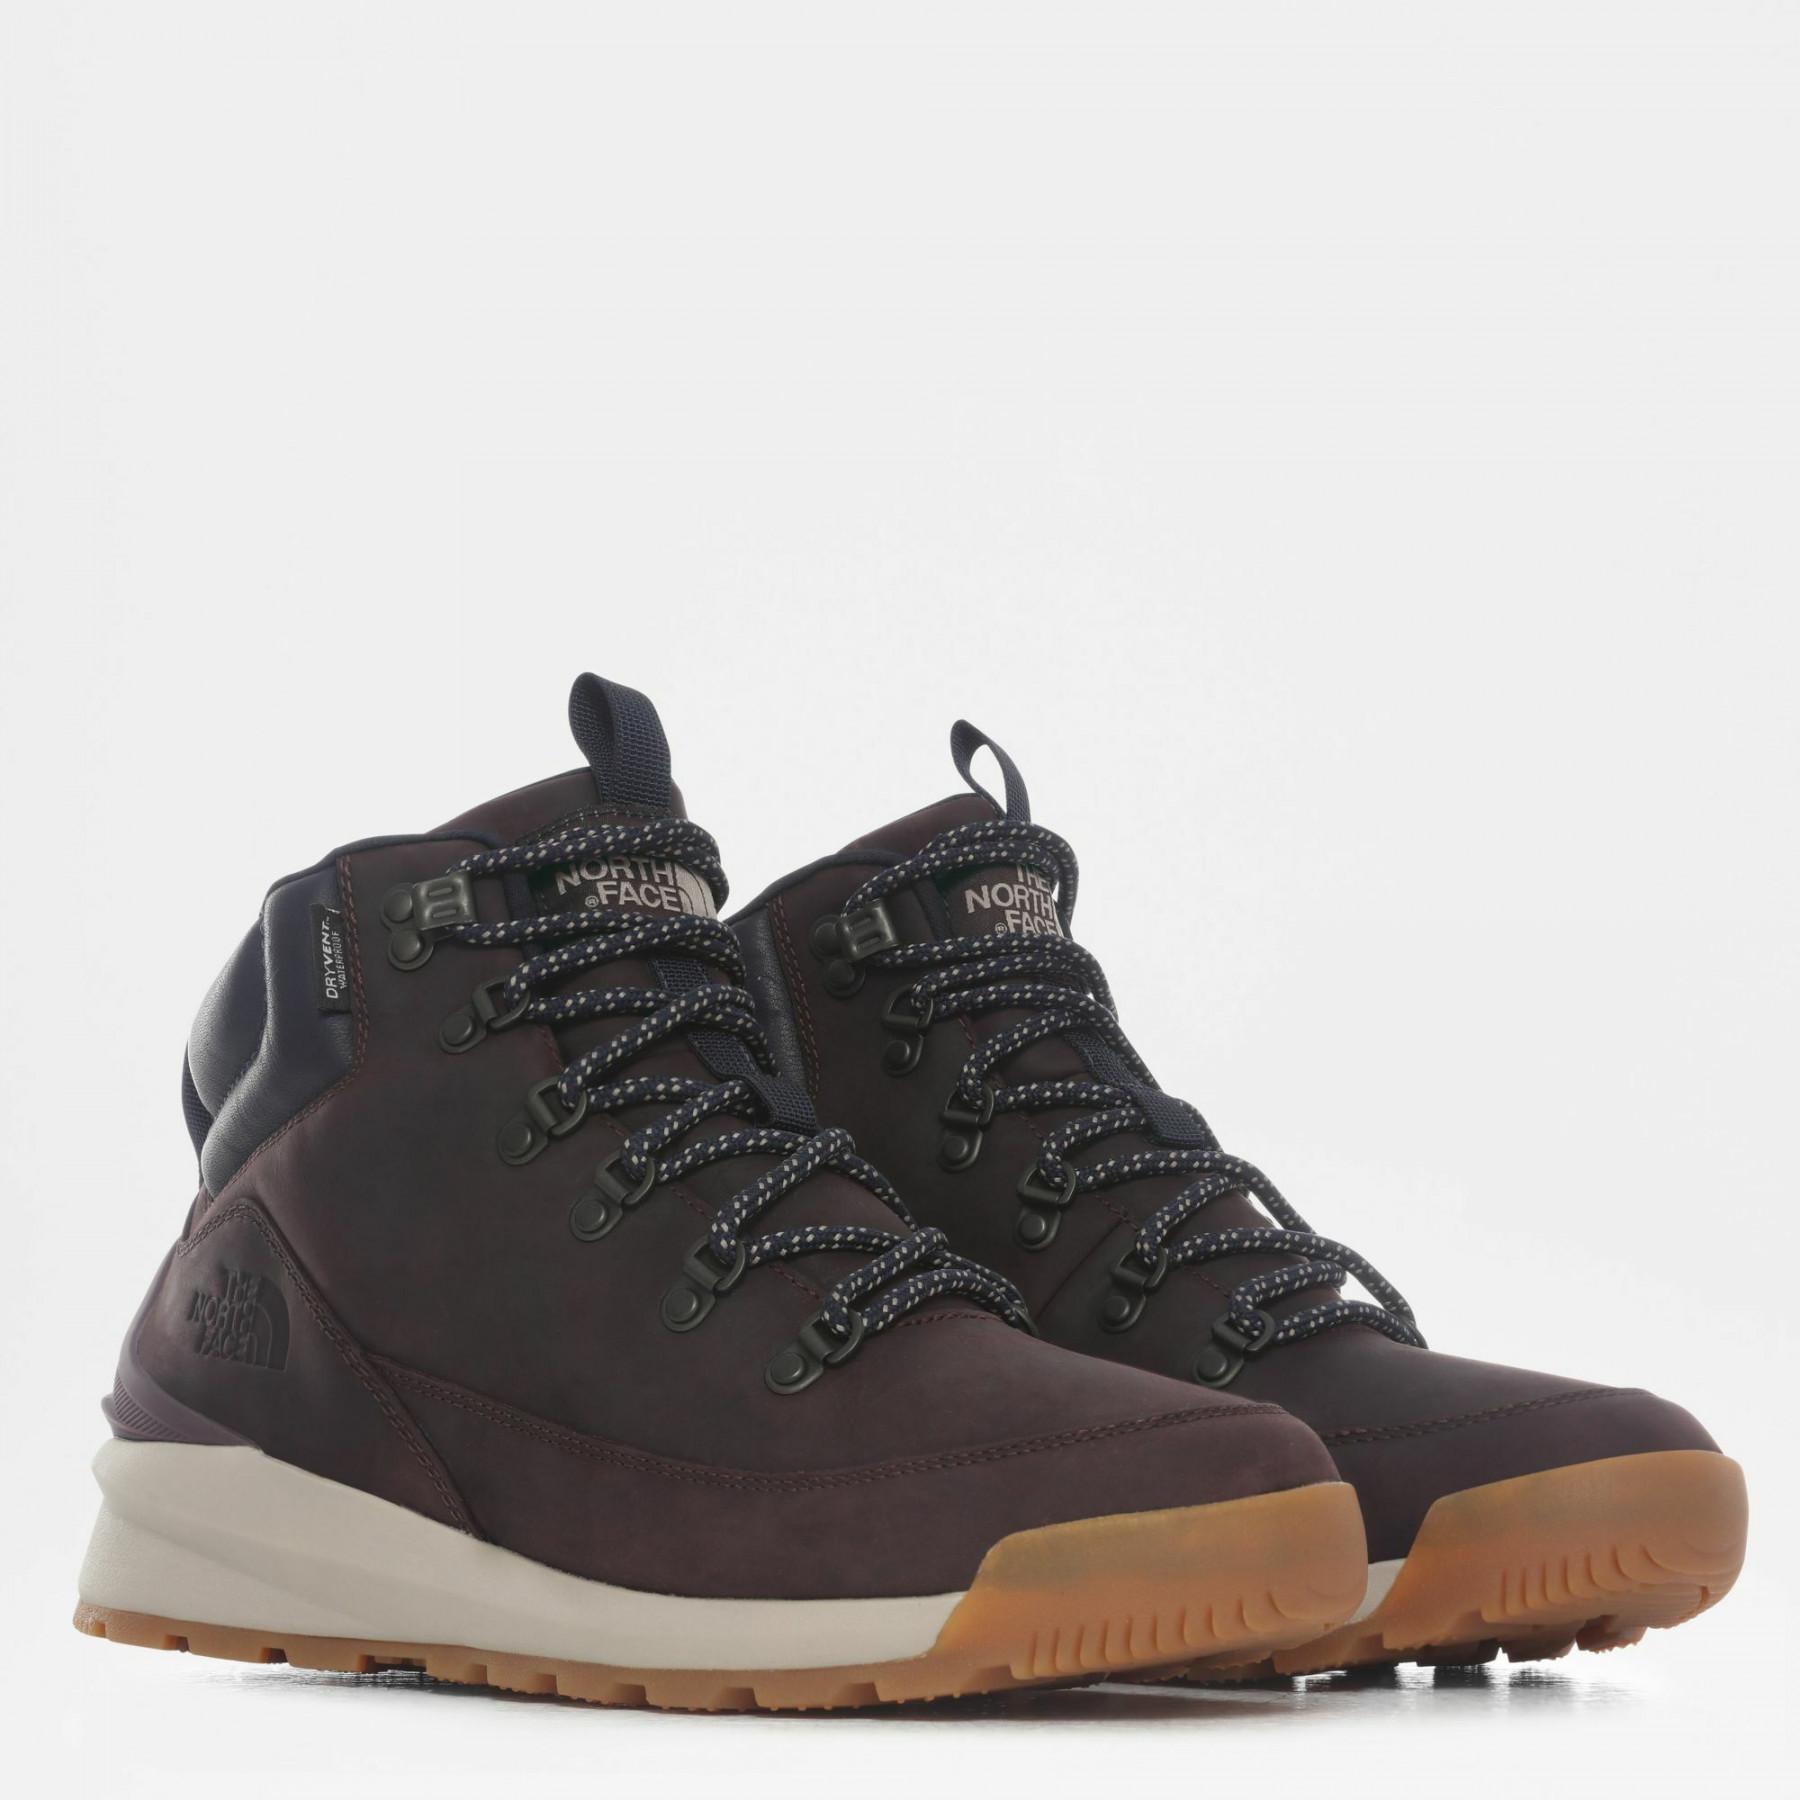 Trainers The North Face Premium waterproof-leather